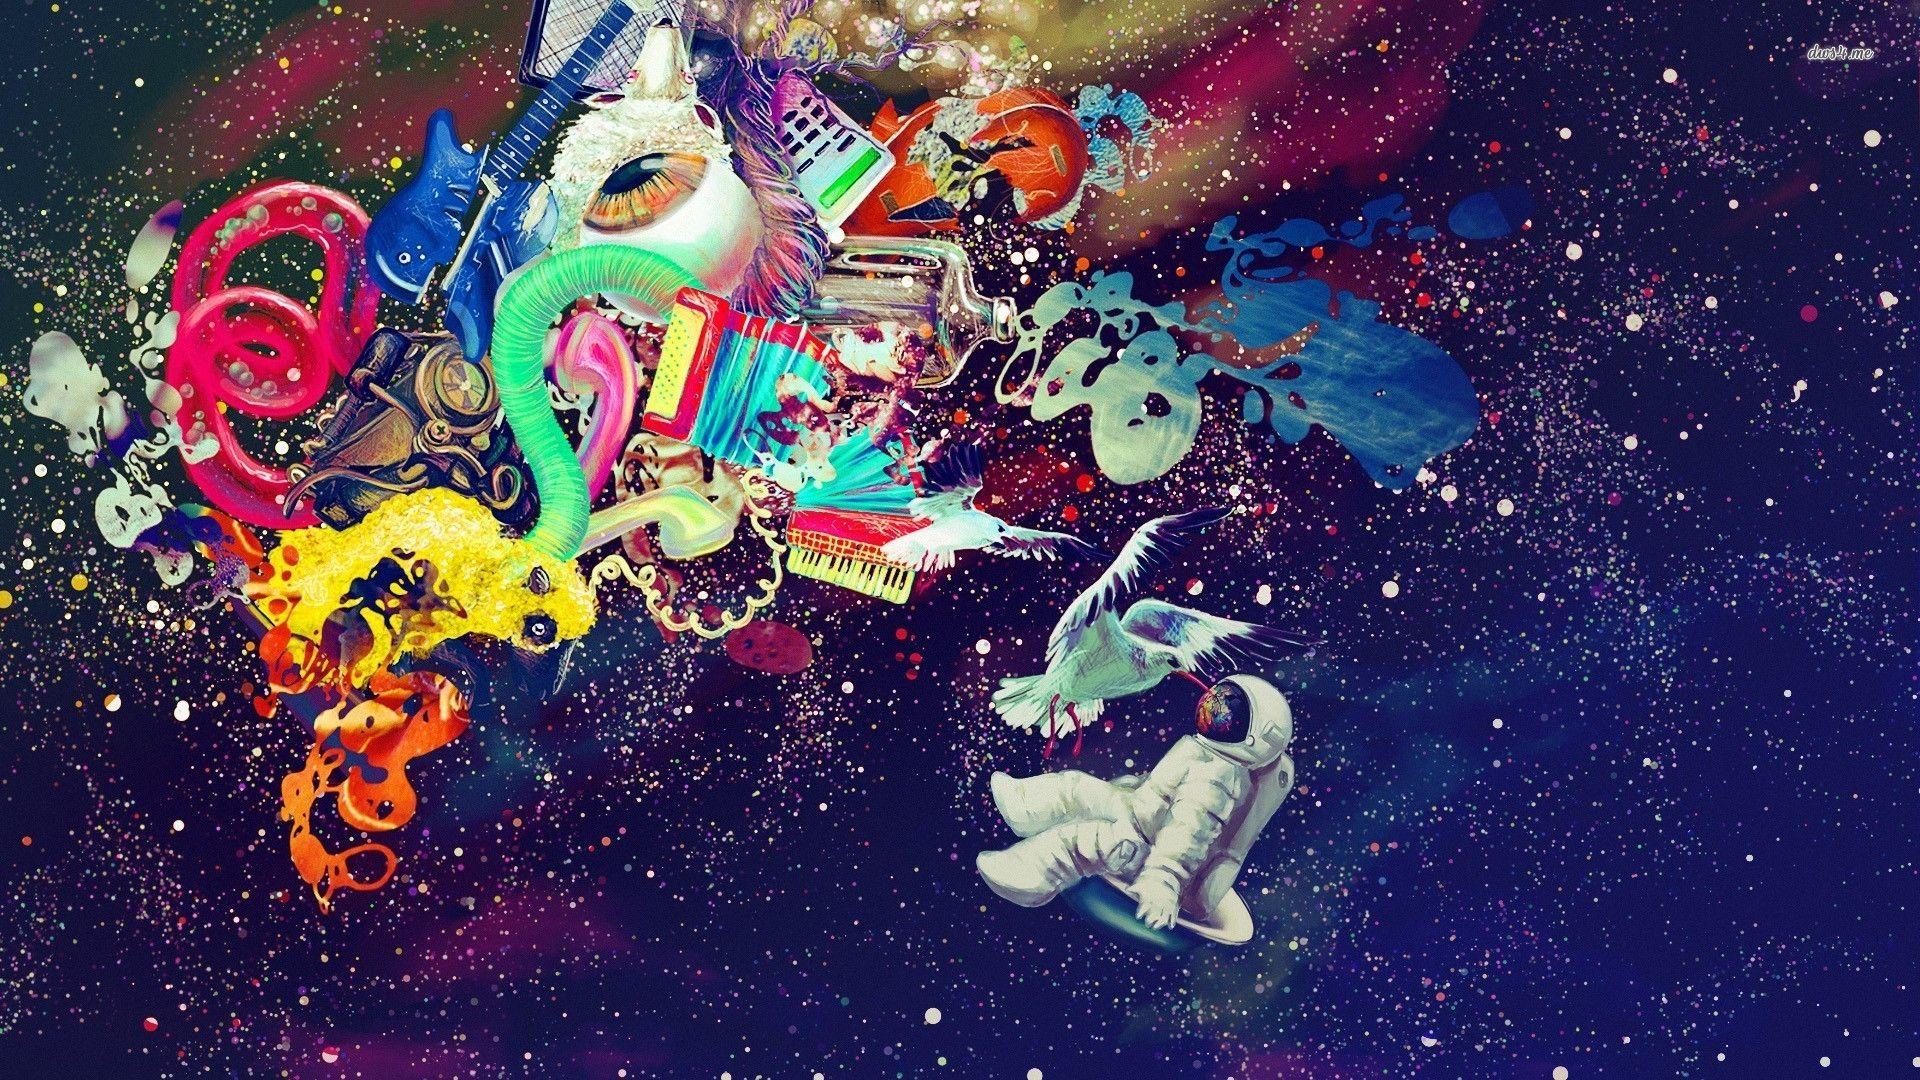 Astronaut Wallpaper Group With 72 Items 1920x1080 (846.42 KB)